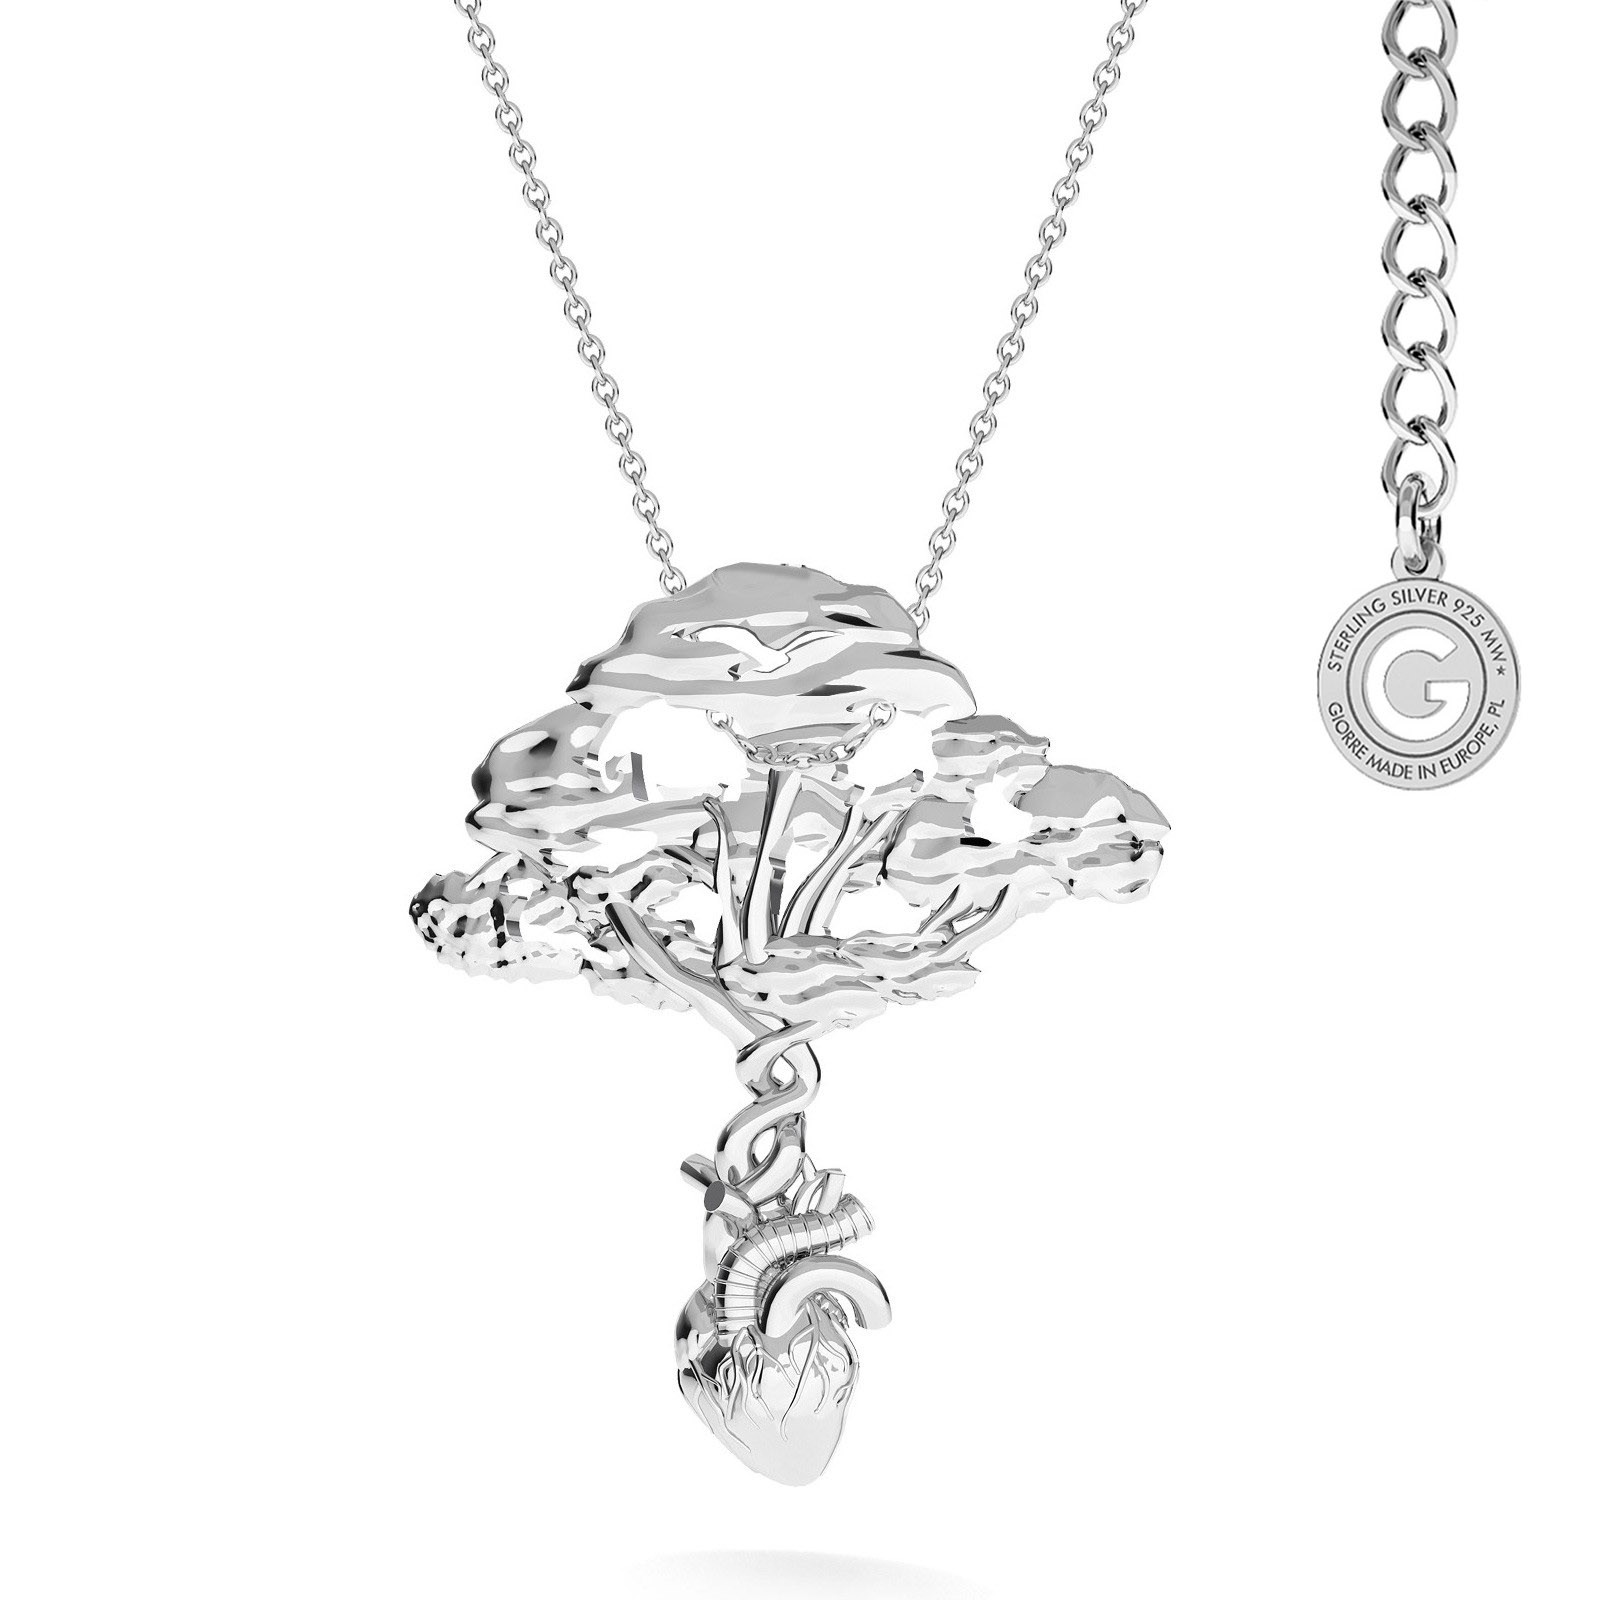 T°ra'vel'' Necklace - Tree, silver 925